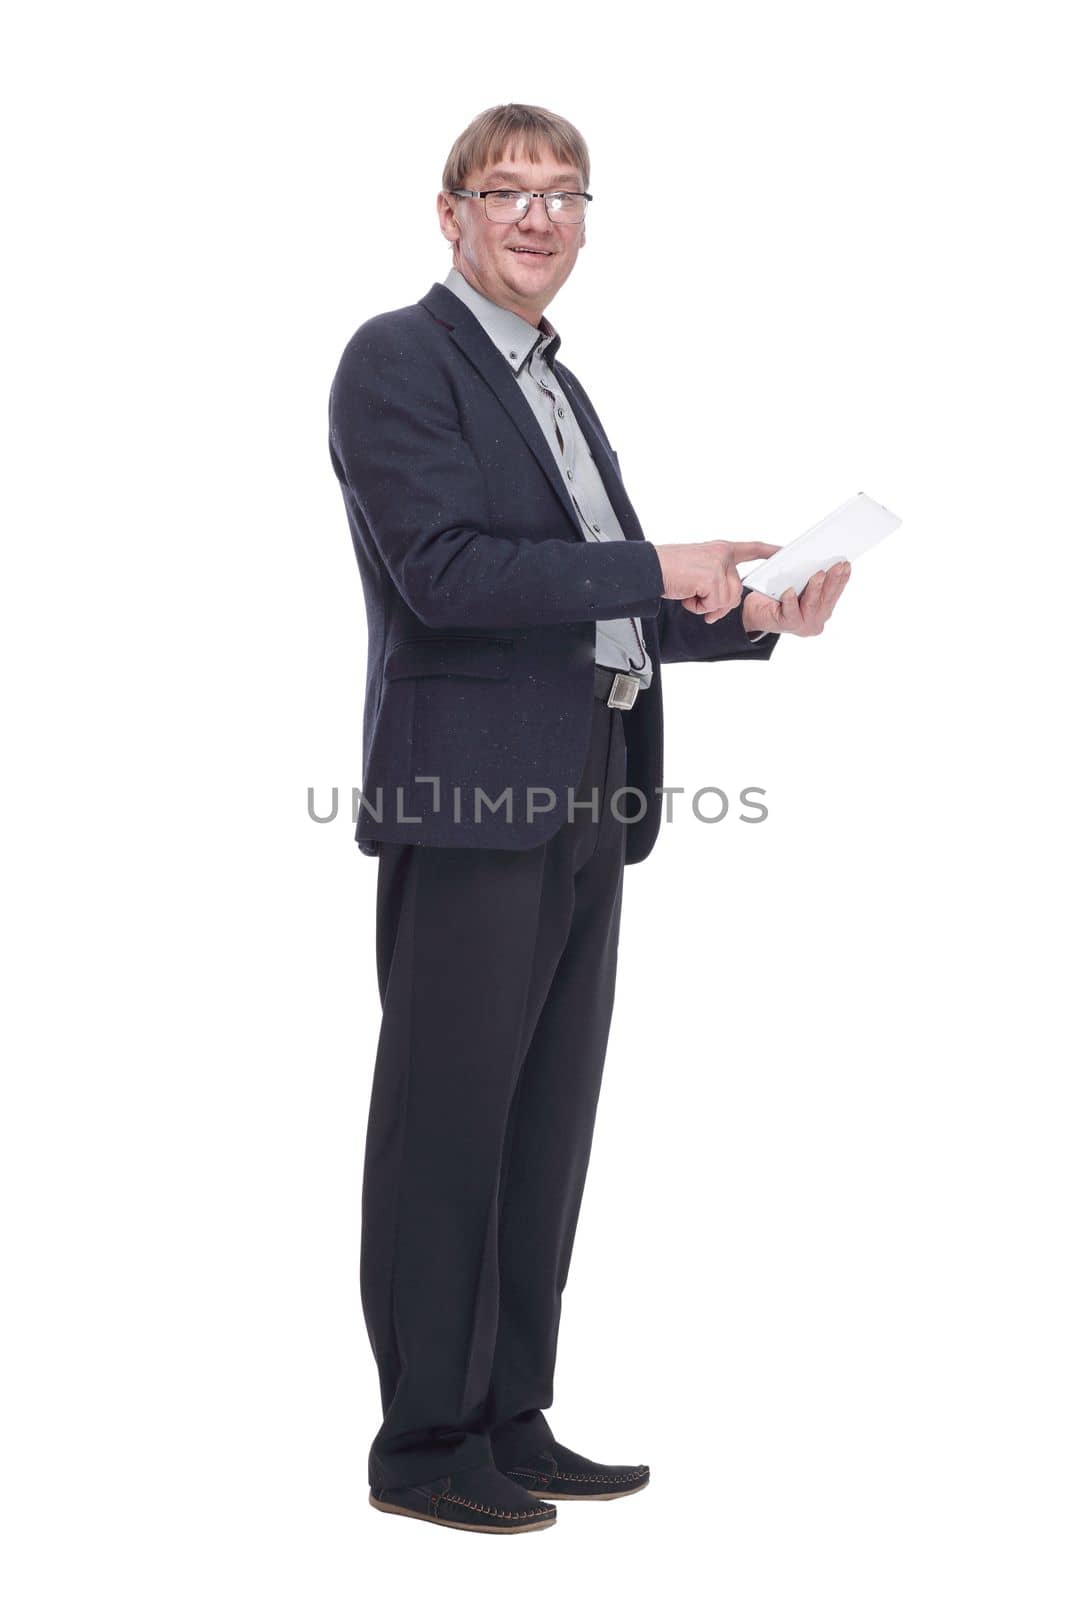 side view. senior business man using a digital tablet . isolated on a white background.